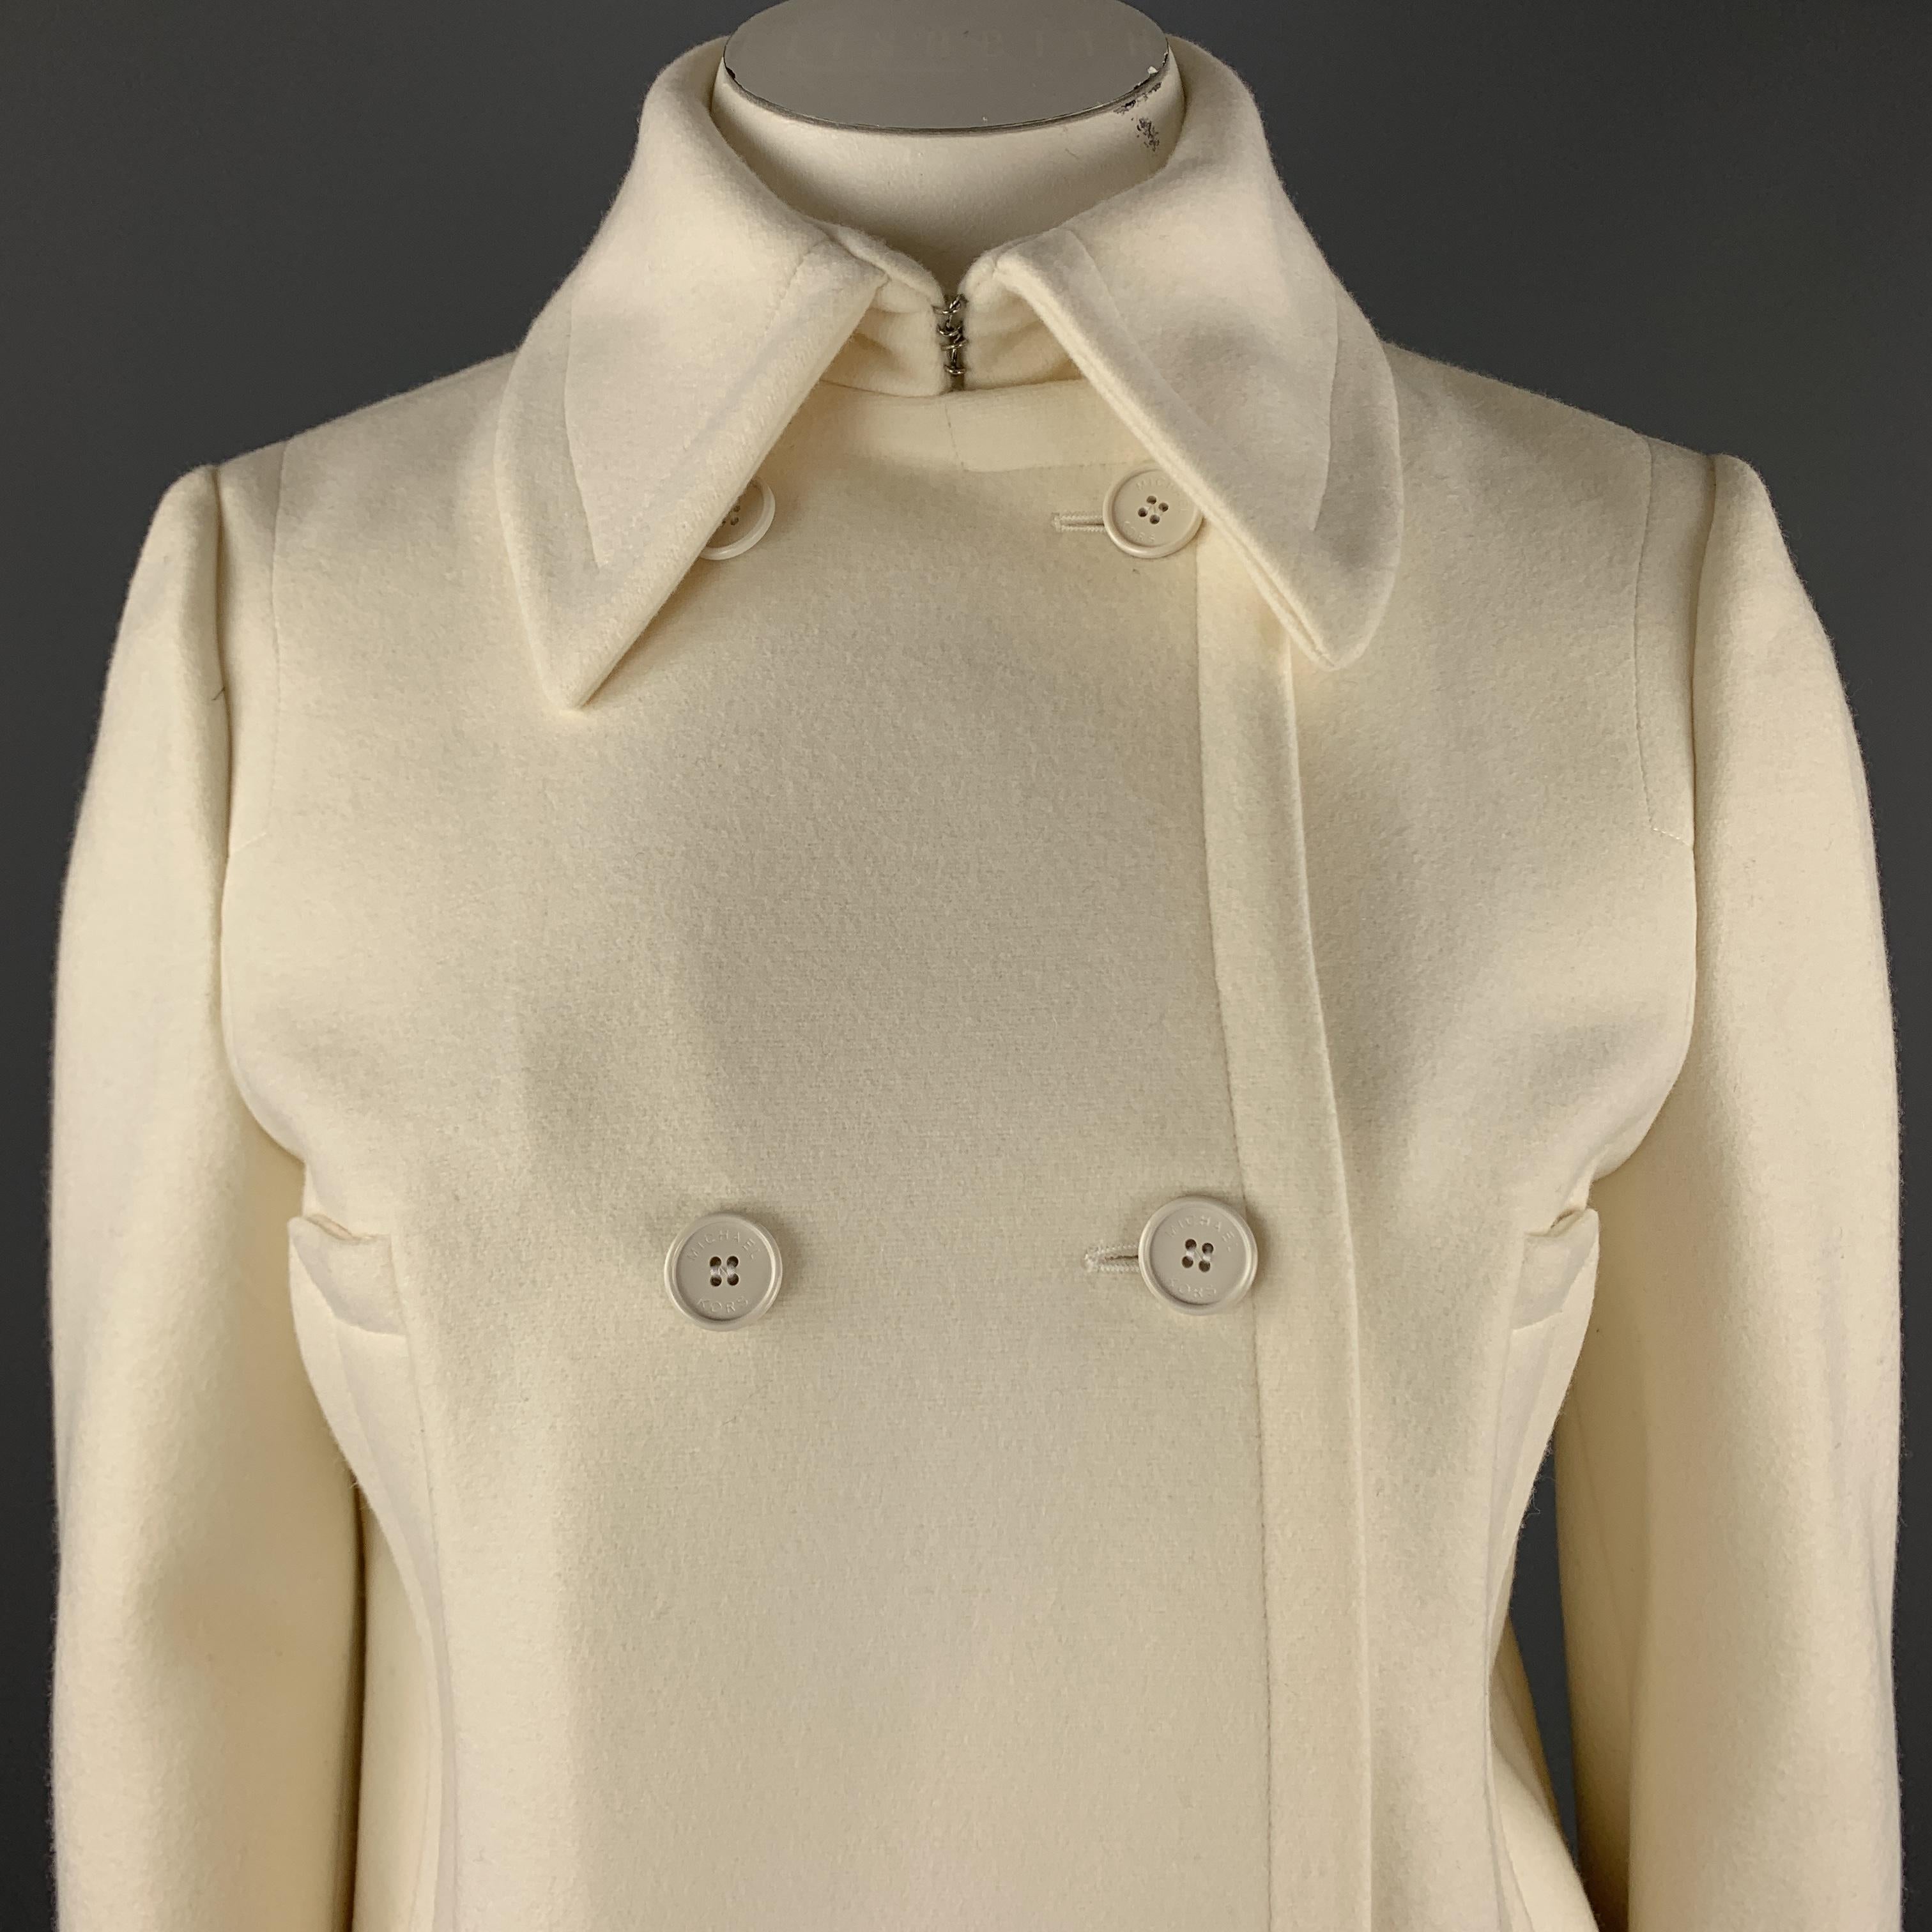 MICHAEL KORS cropped peacoat comes in cream wool with a pointed collar, double breasted button up front, and mock pockets. Made in Italy.

New with Tags.
Marked: US 12

Measurements:

Shoulder: 16 in.
Bust: 42 in.
Sleeve: 26 in.
Length: 21 in.